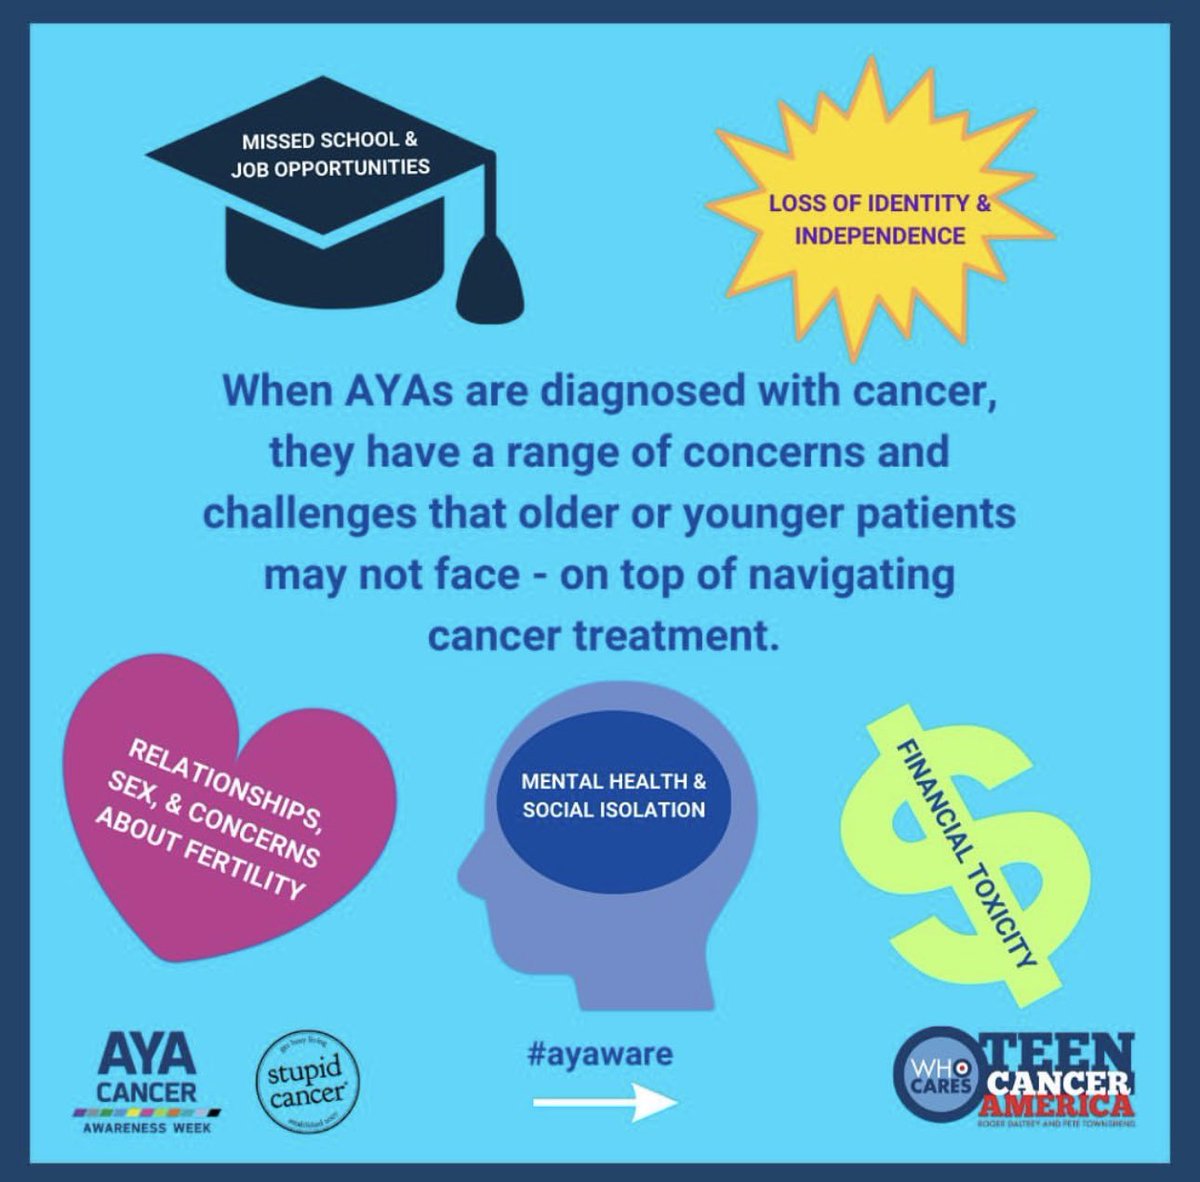 #AYAcancer patients face a unique crossroad between cancers affecting children or older adults. Addressing these needs is essential for care that is #AYAware